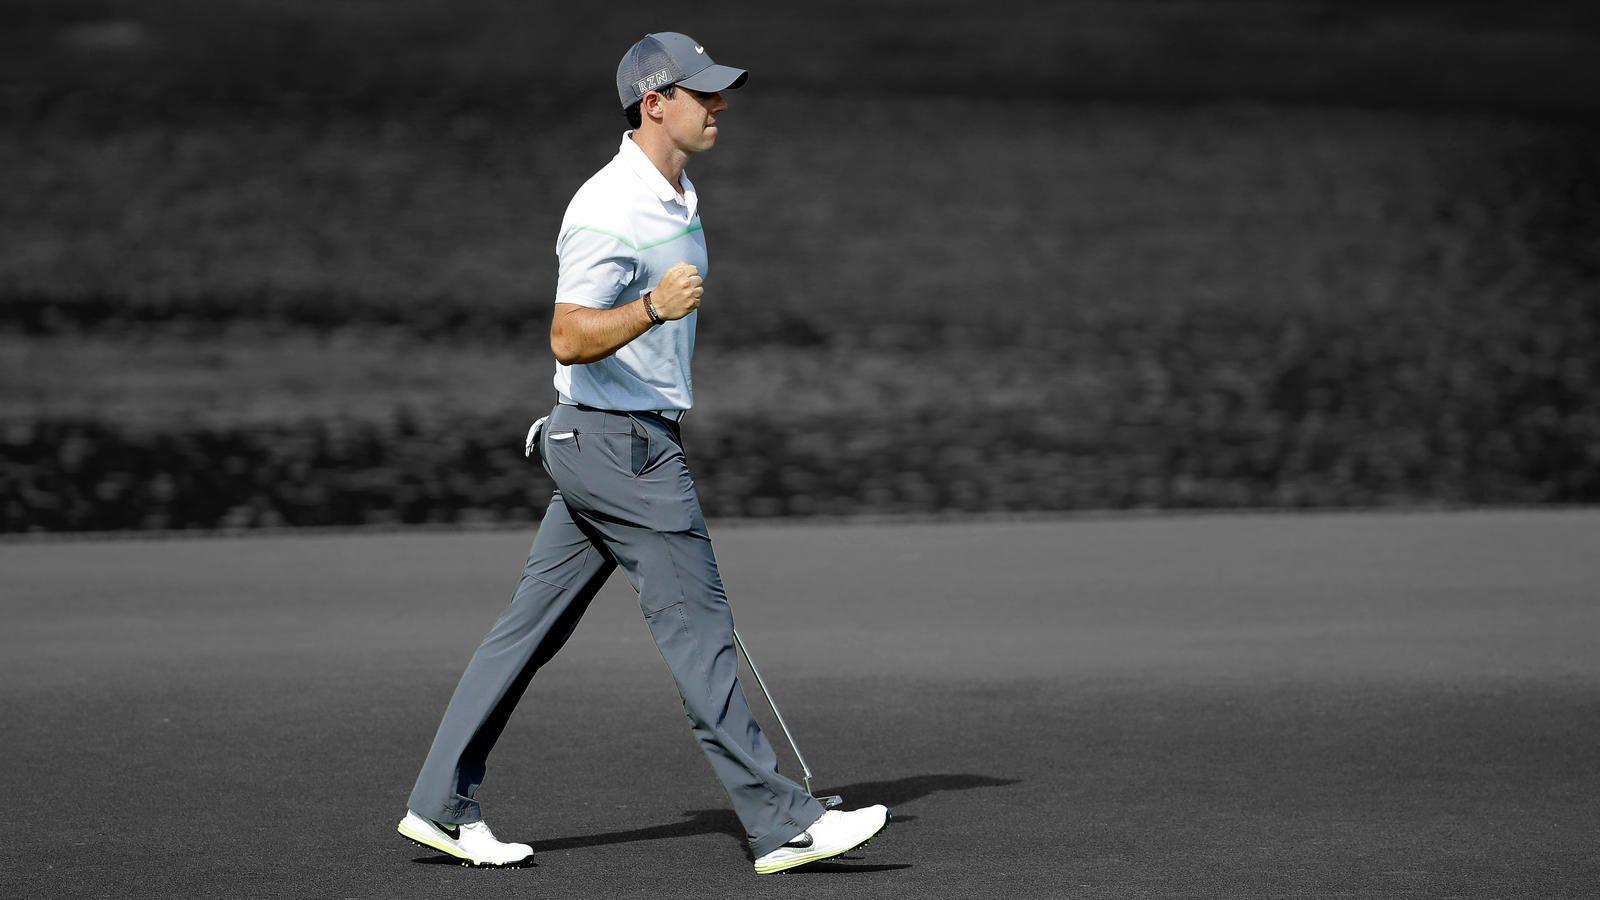 Rory McIlroy earns his 11th PGA Tour victory in dominant fashion